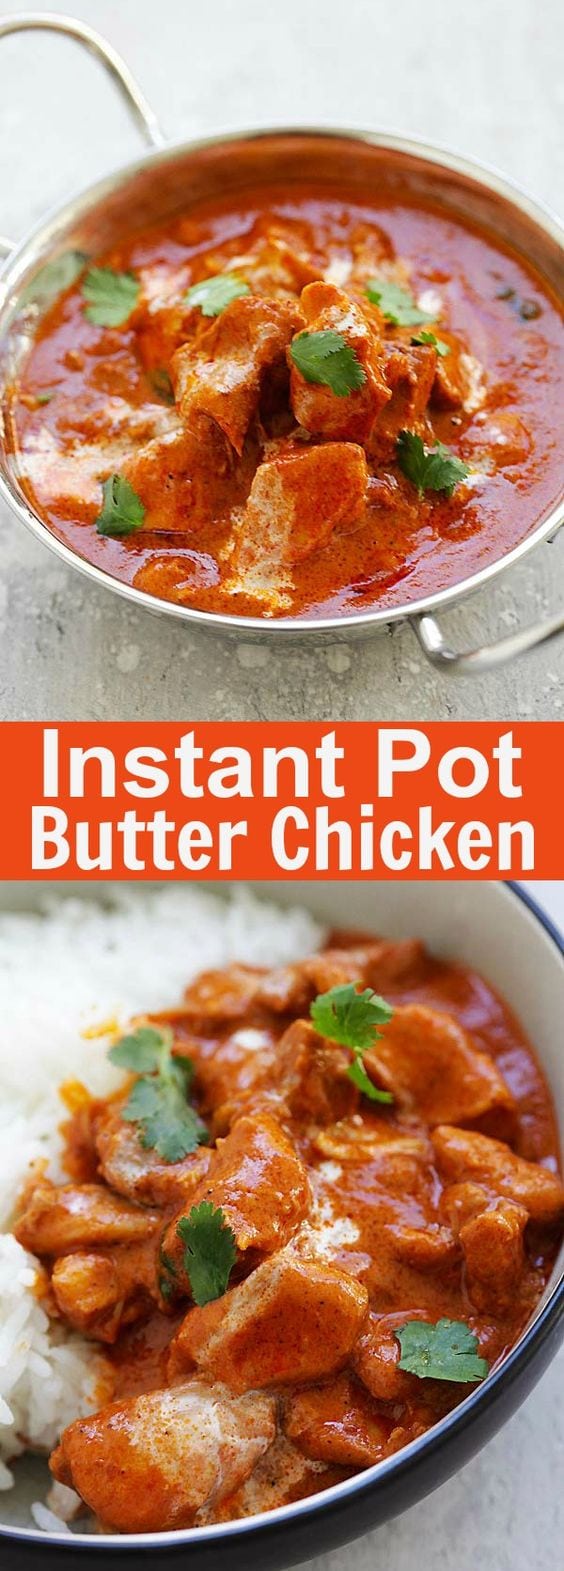 Instant Pot Butter Chicken - the best Indian butter chicken recipe with rich, creamy and delicious tomato butter chicken sauce. This easy recipe takes only 10 minutes | rasamalaysia.com